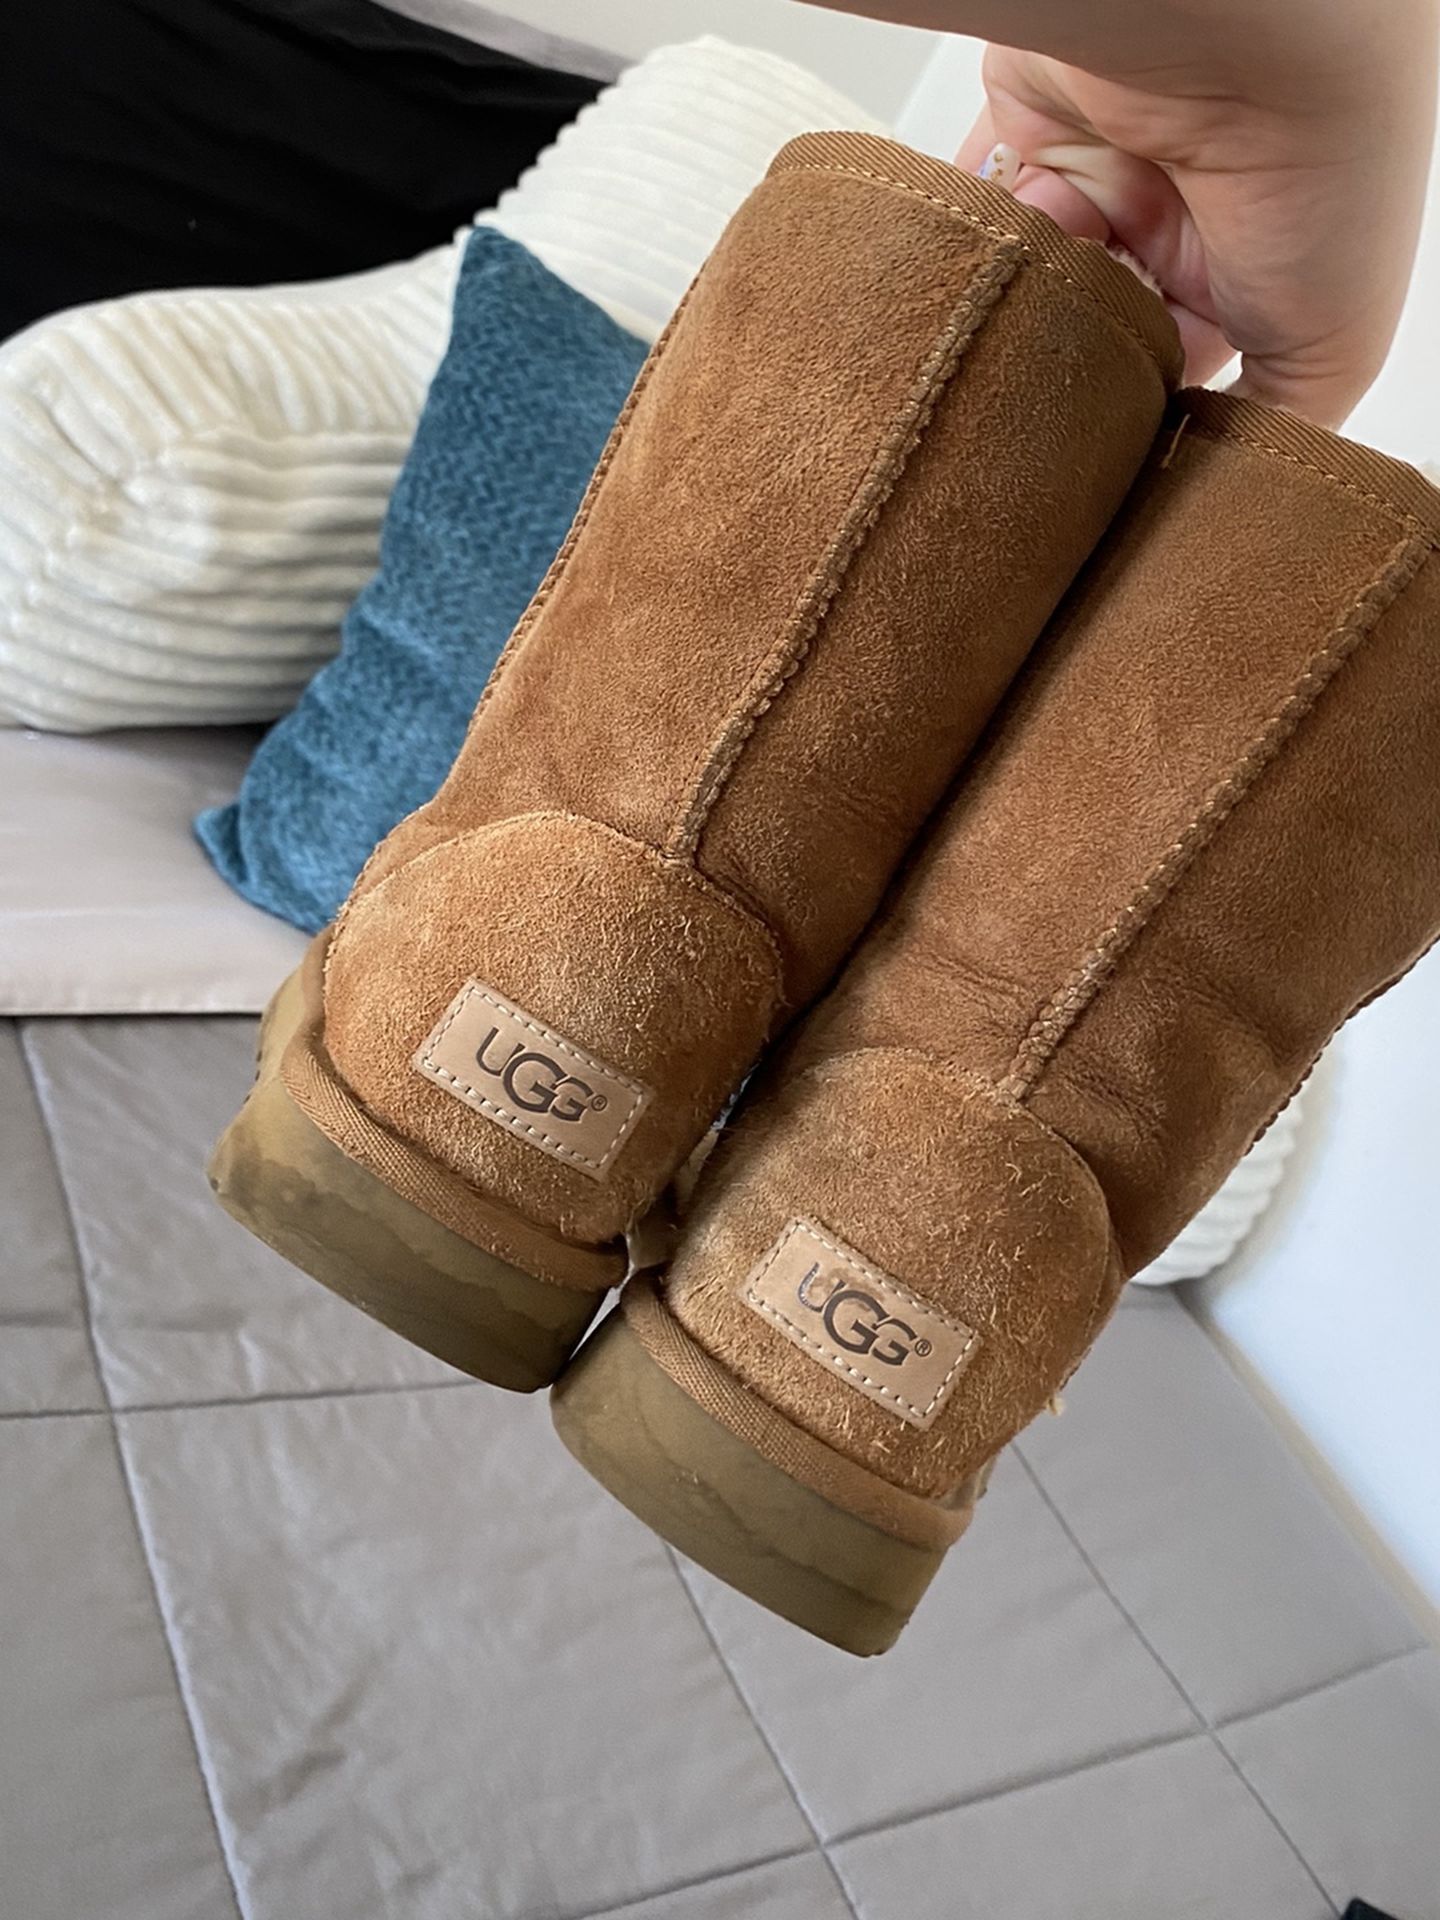 Ugg Boots Woman Size 6